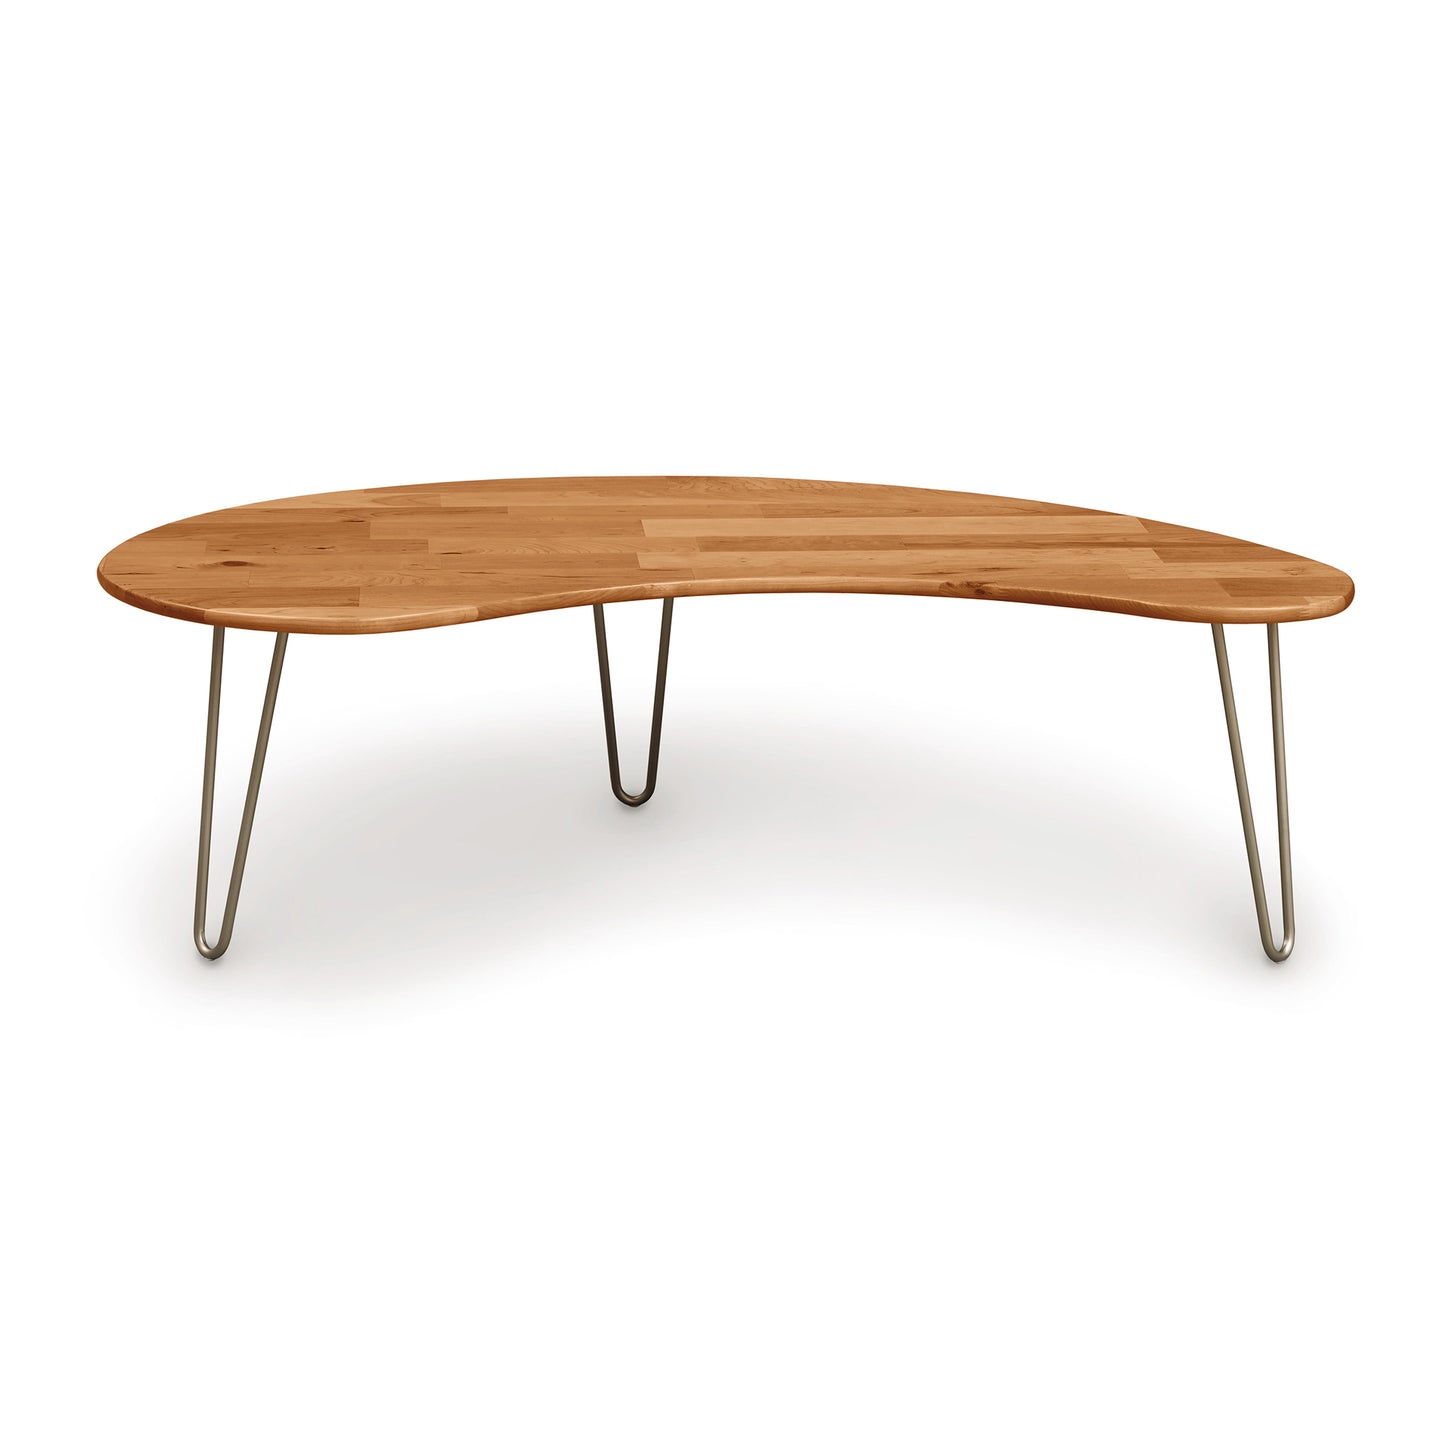 A mid-century modern wooden Essentials Kidney Shaped Coffee Table with a smooth, organic shape and four metal hairpin legs on a white background by Copeland Furniture.